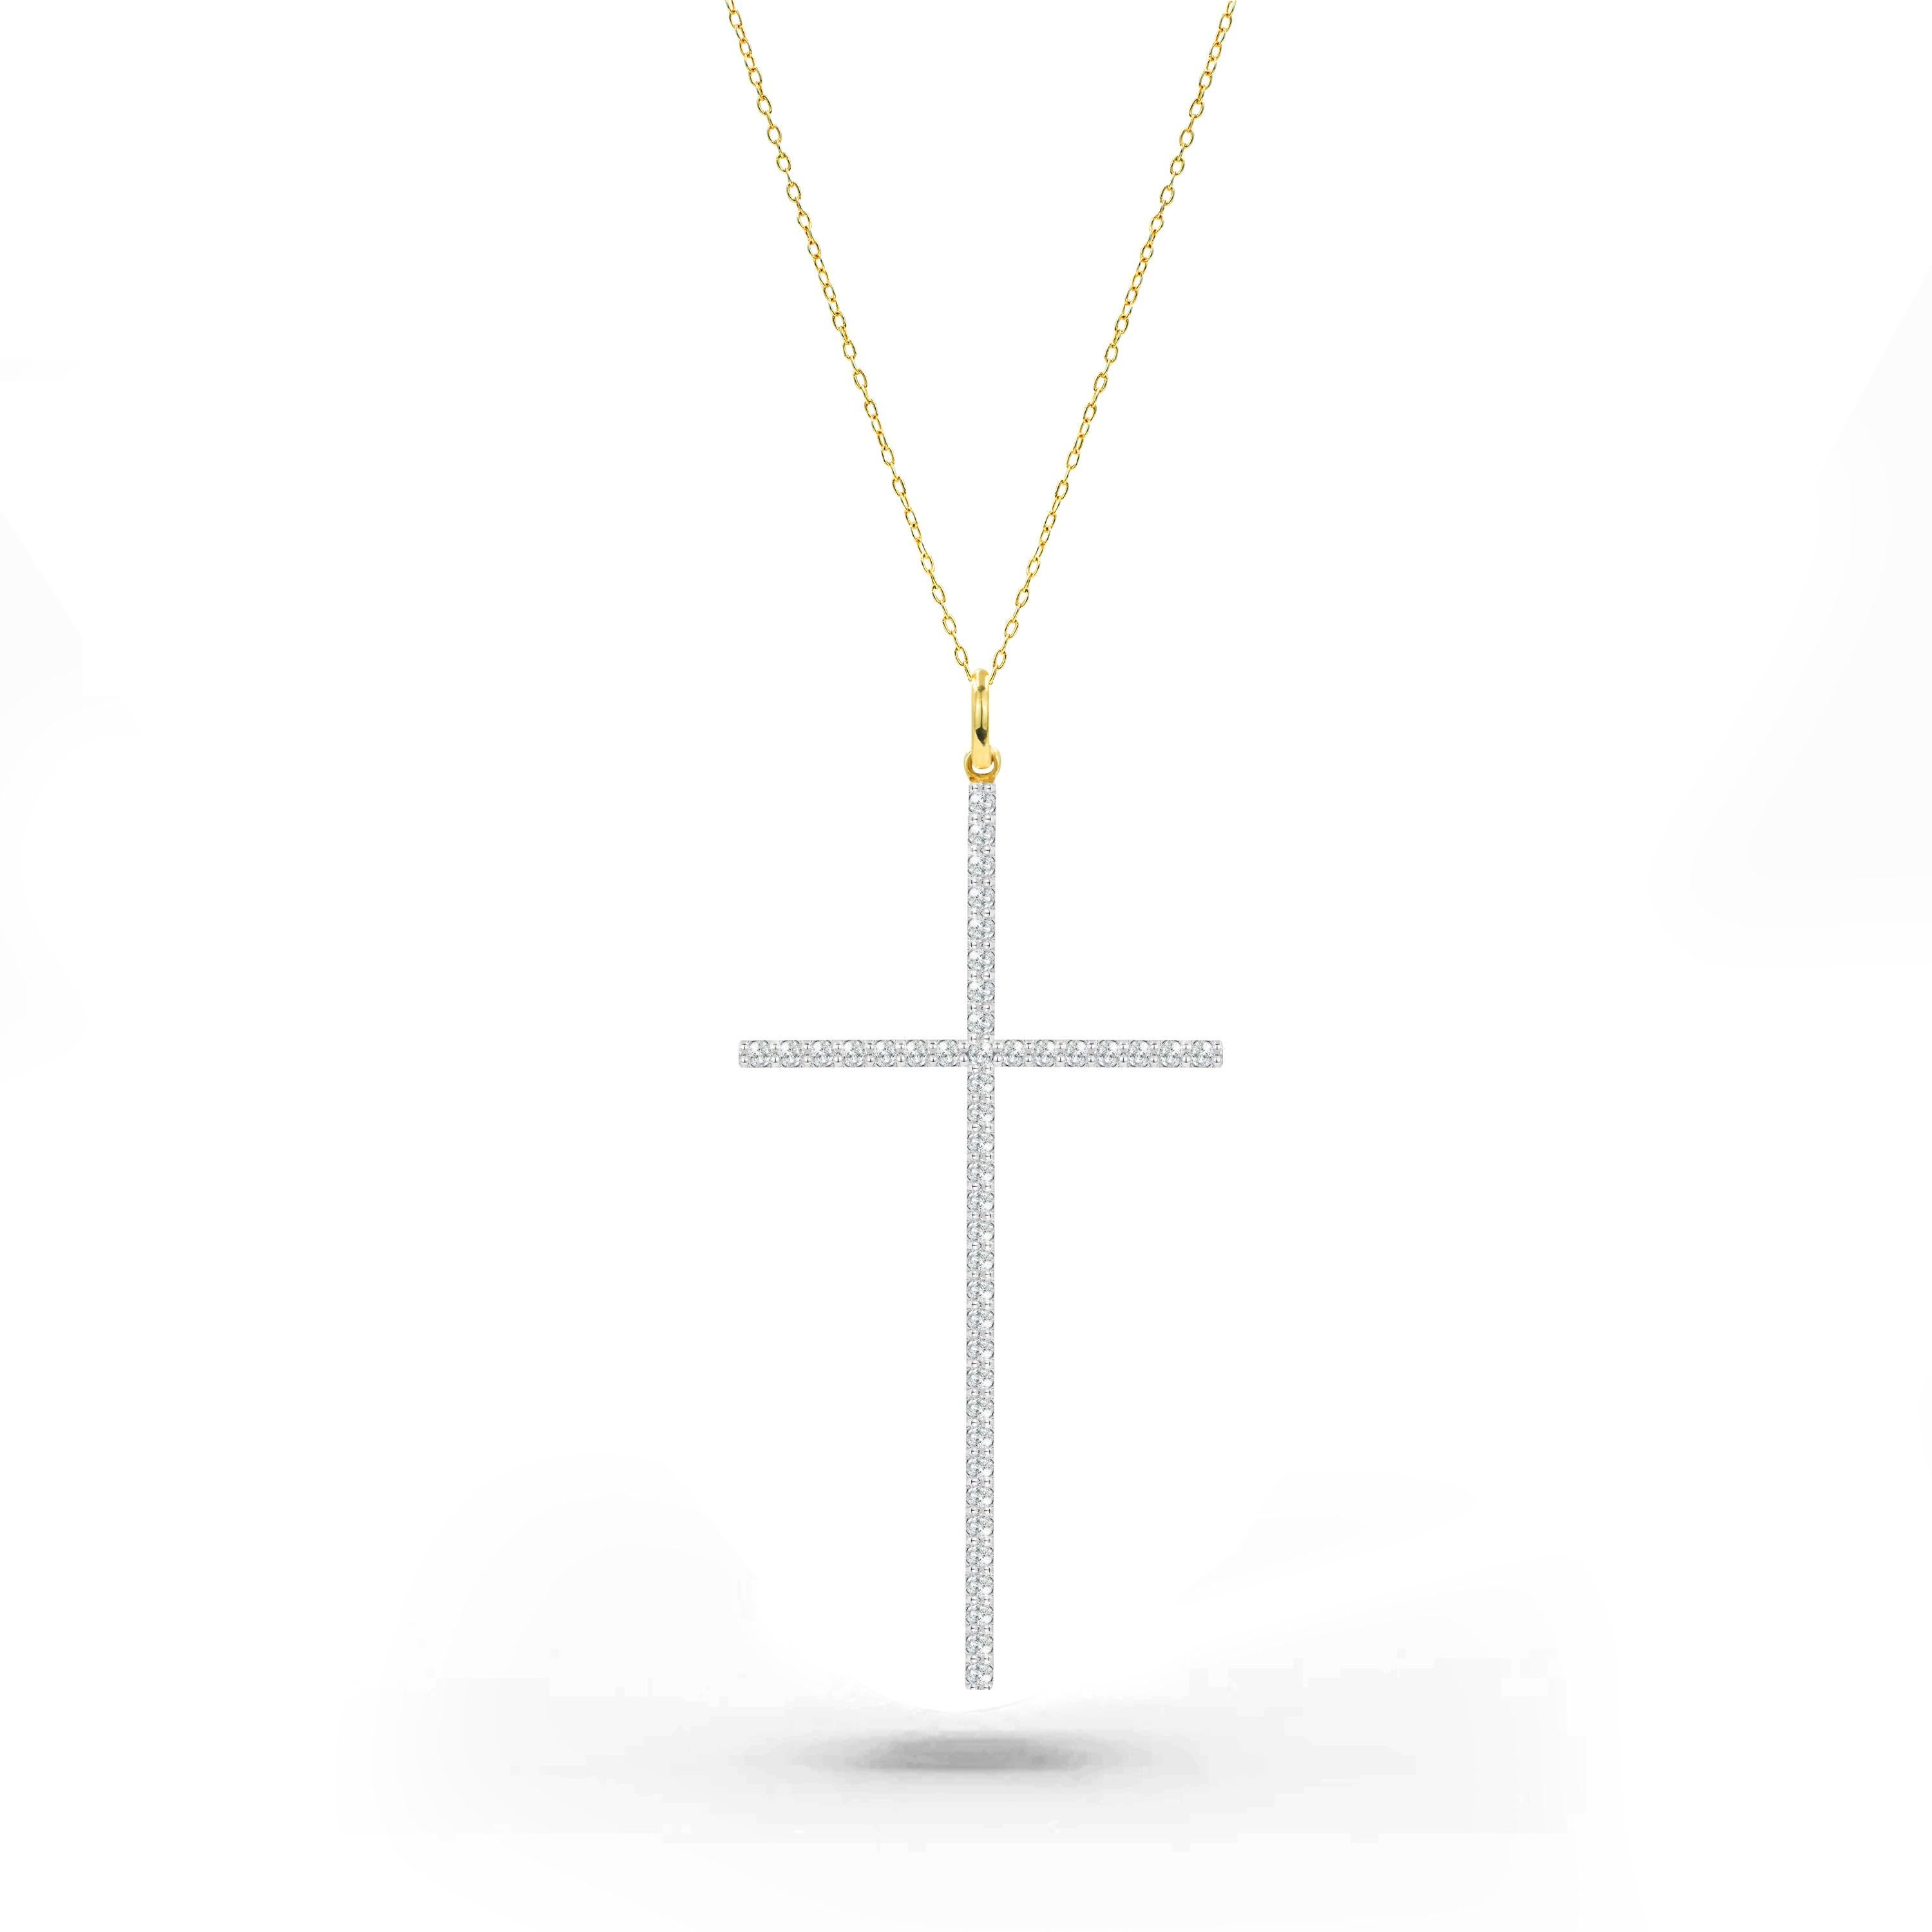 Diamond Cross Pendant with Round Cut Real Natural Diamond in 14K solid gold.
Available in three colors of gold: White Gold / Rose Gold / Yellow Gold.

Lightweight and gorgeous, these are a great gift for anyone on your list. Perfect for everyday